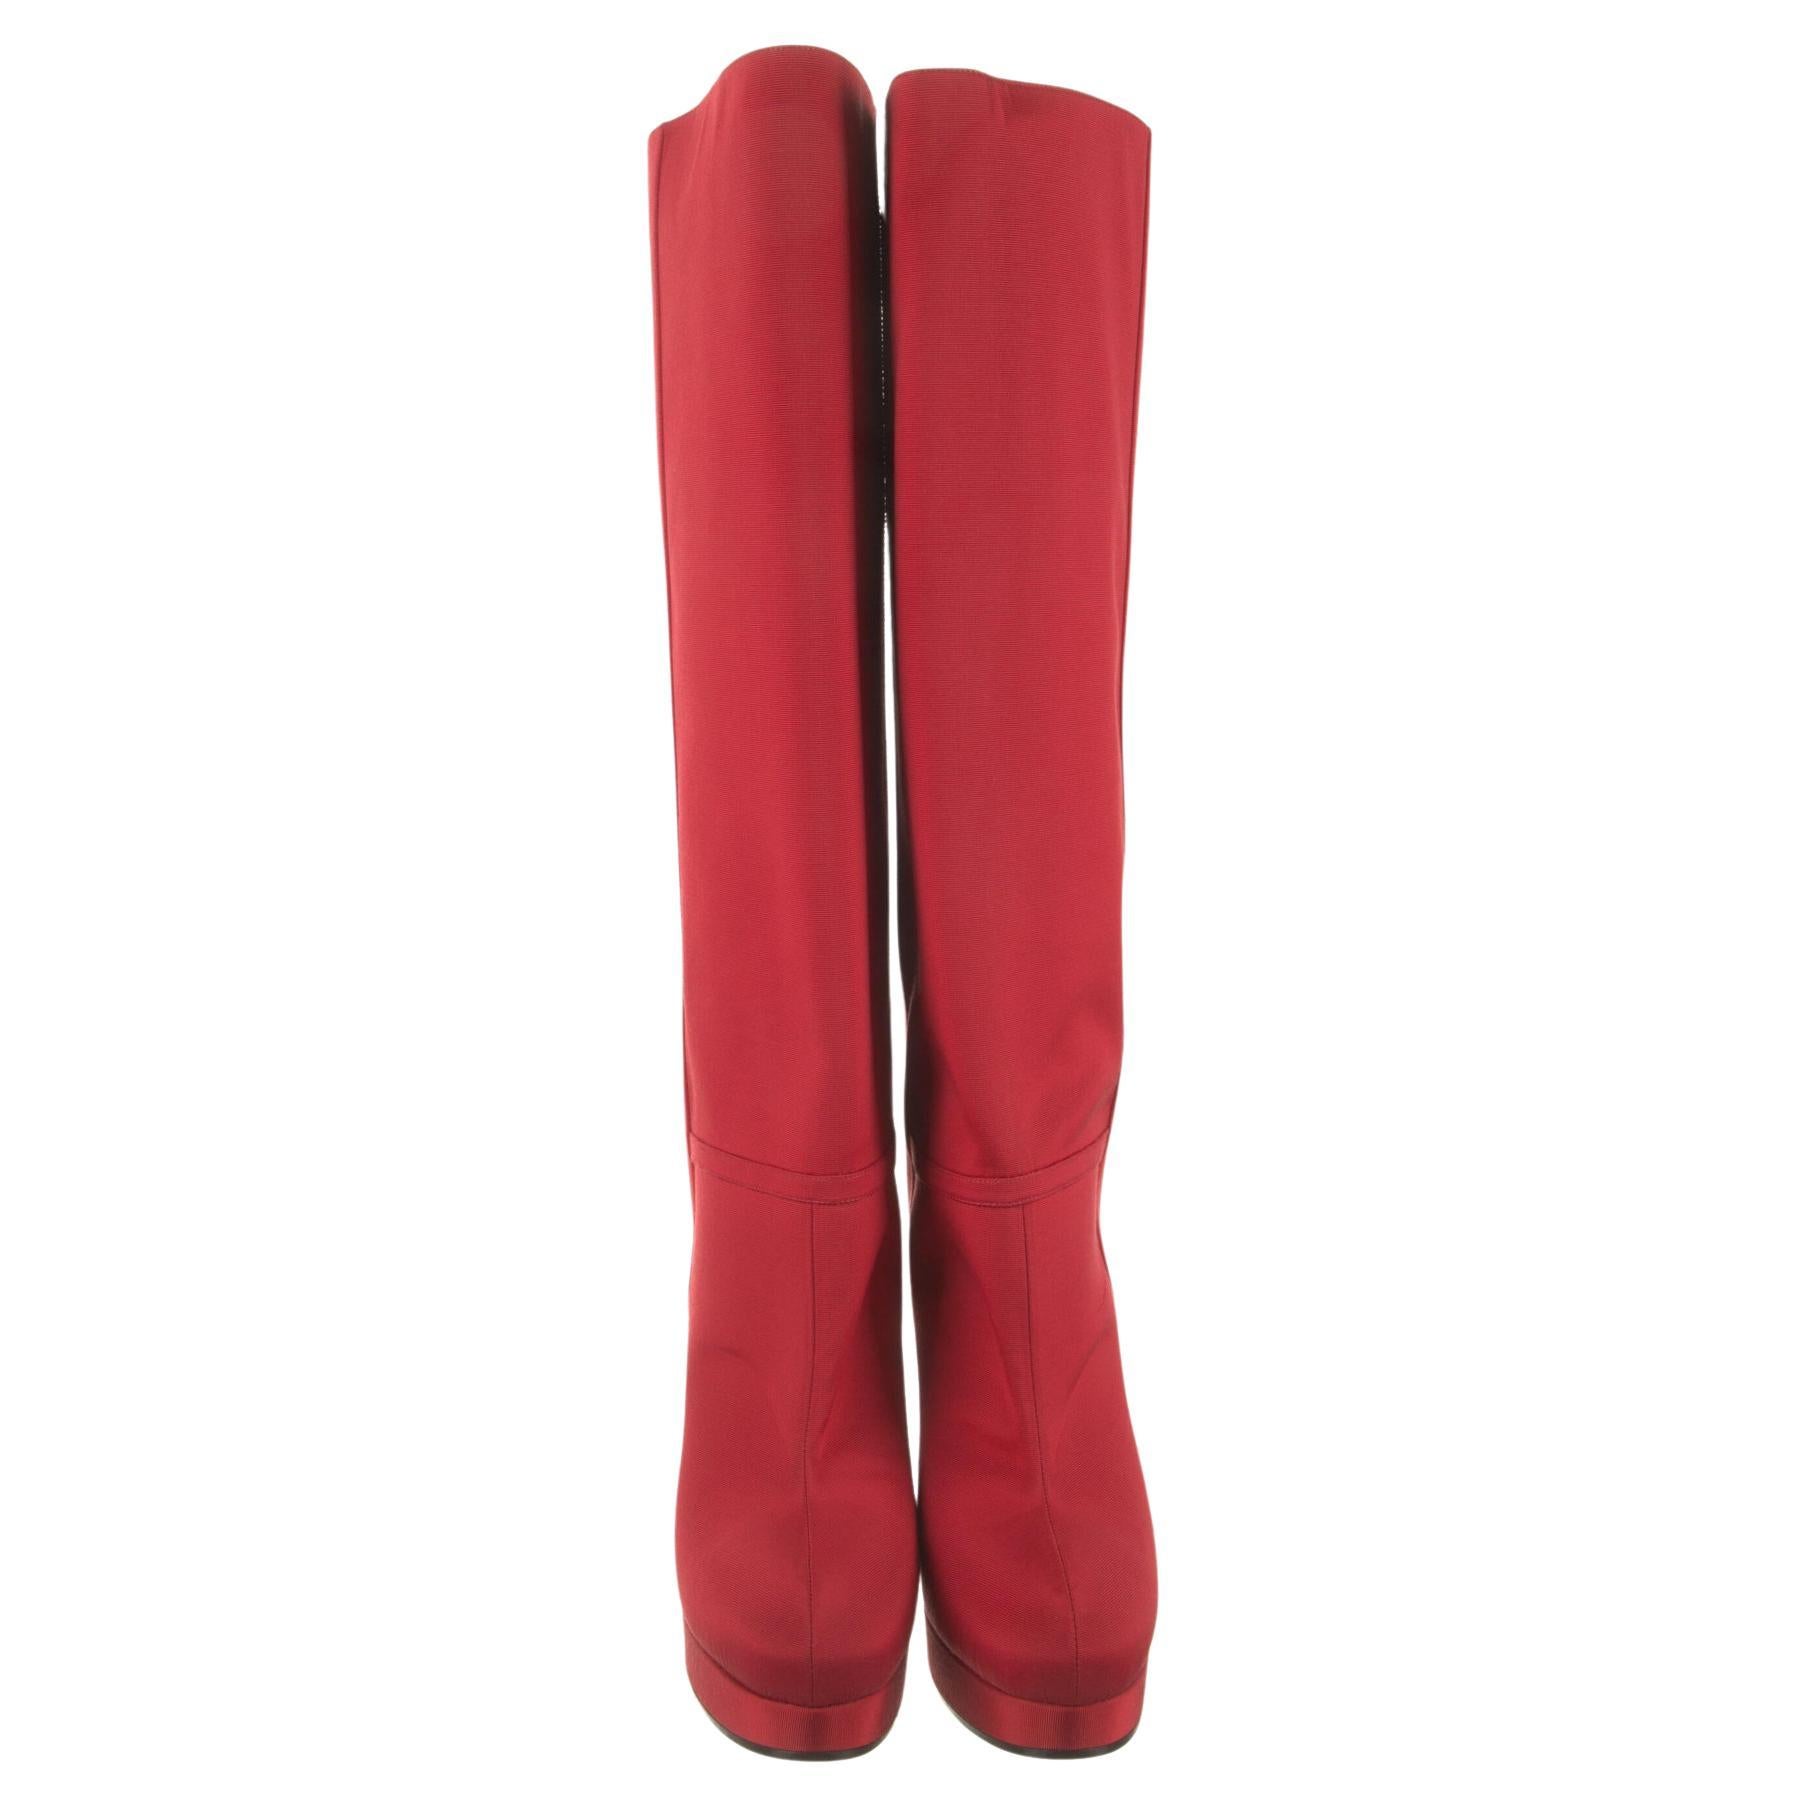 Brand New With Box
$2010
Fall 2019
Size: 38
Alessandro Michele
Gucci Knee-High Boots
Red Cotton Satin
Semi-Pointed Toes
Block Heels with Platform
Includes Box

Circumference: 17